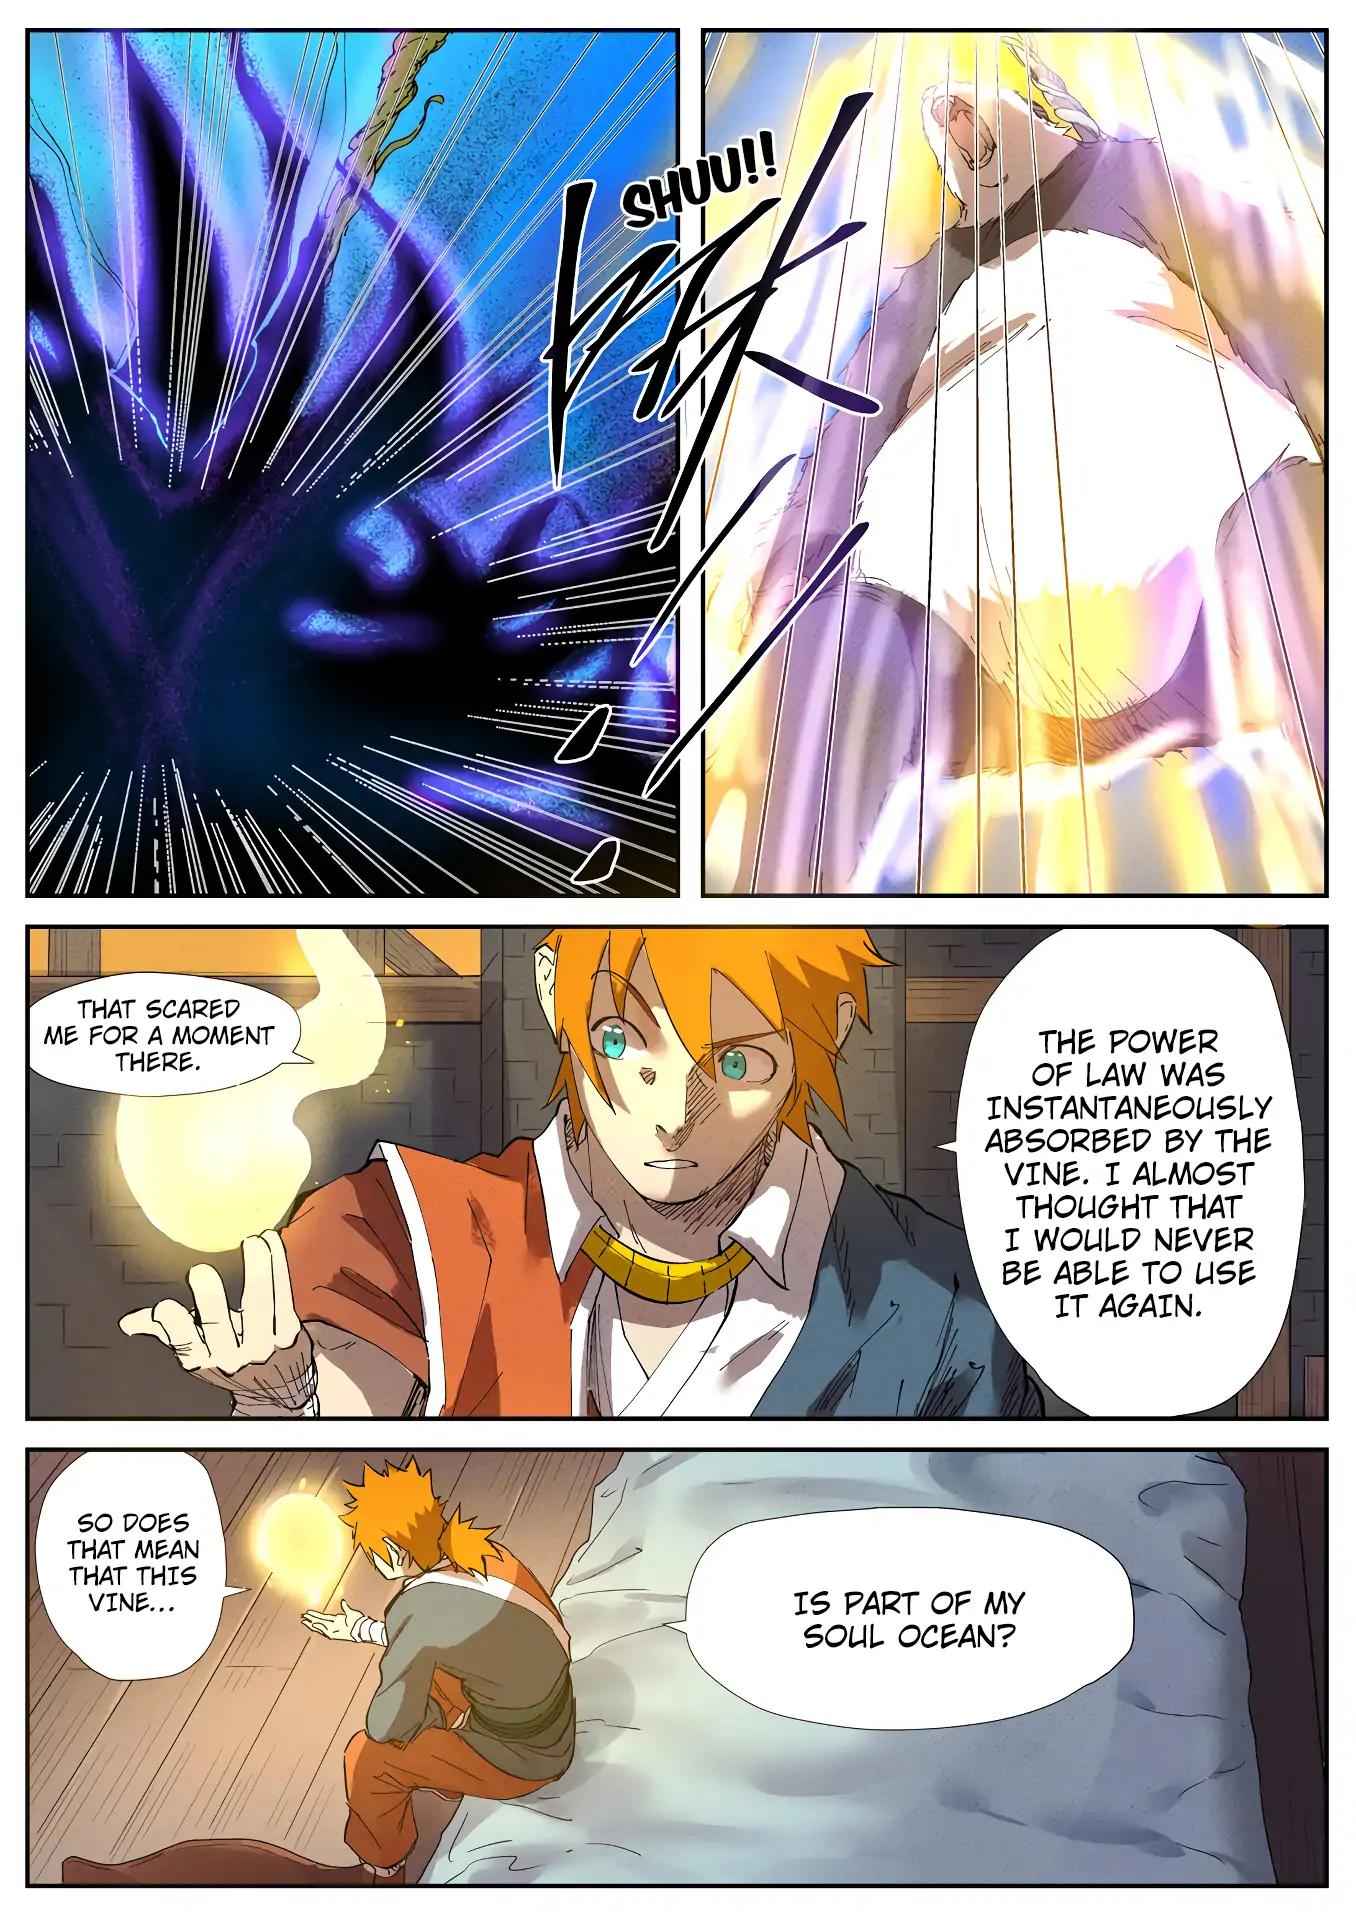 Tales of Demons and Gods Chapter 233.5: